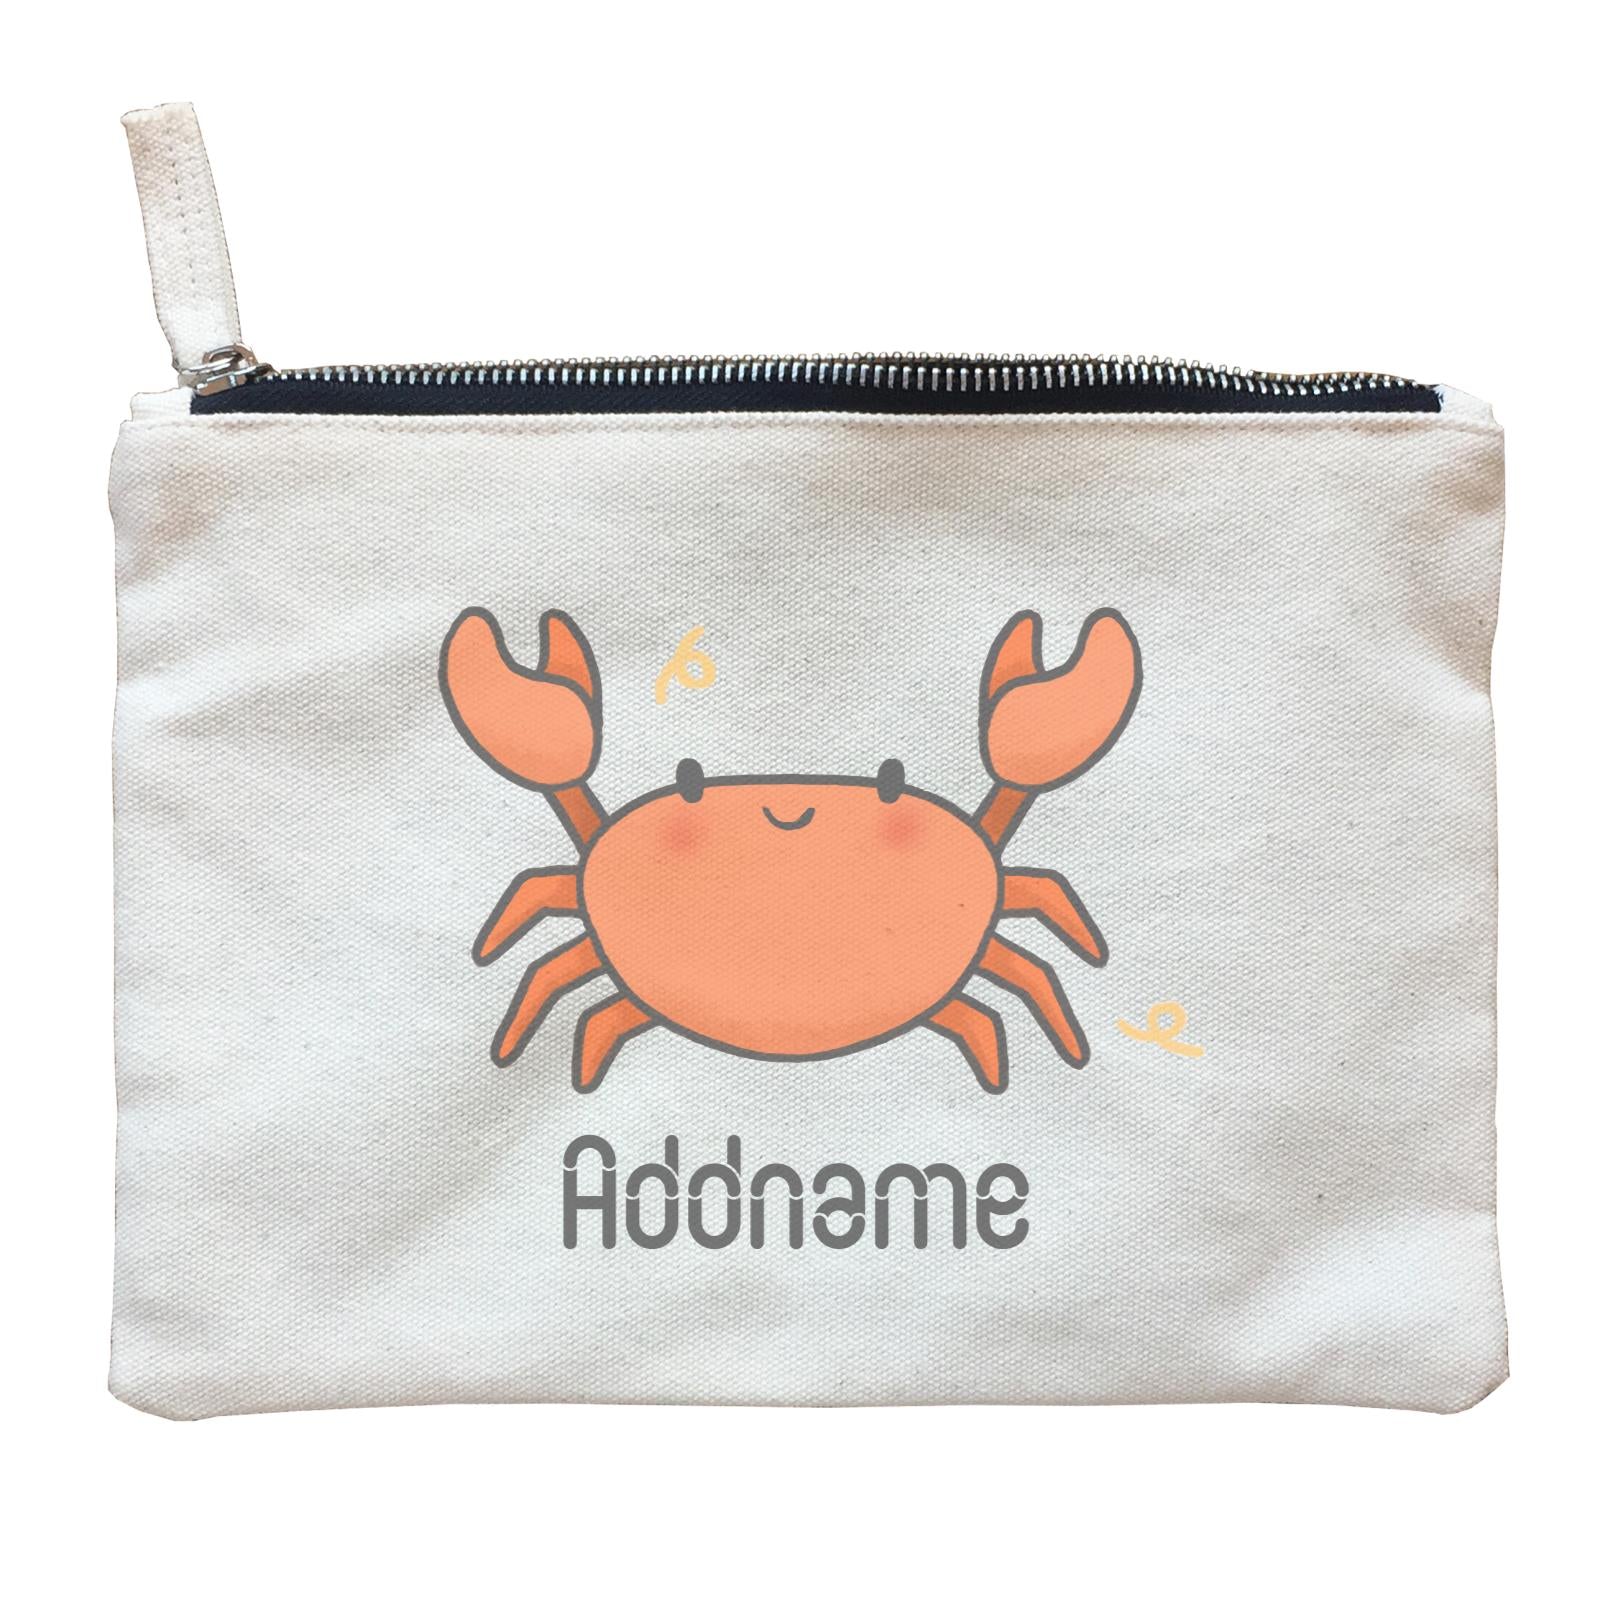 Cute Hand Drawn Style Crab Addname Zipper Pouch